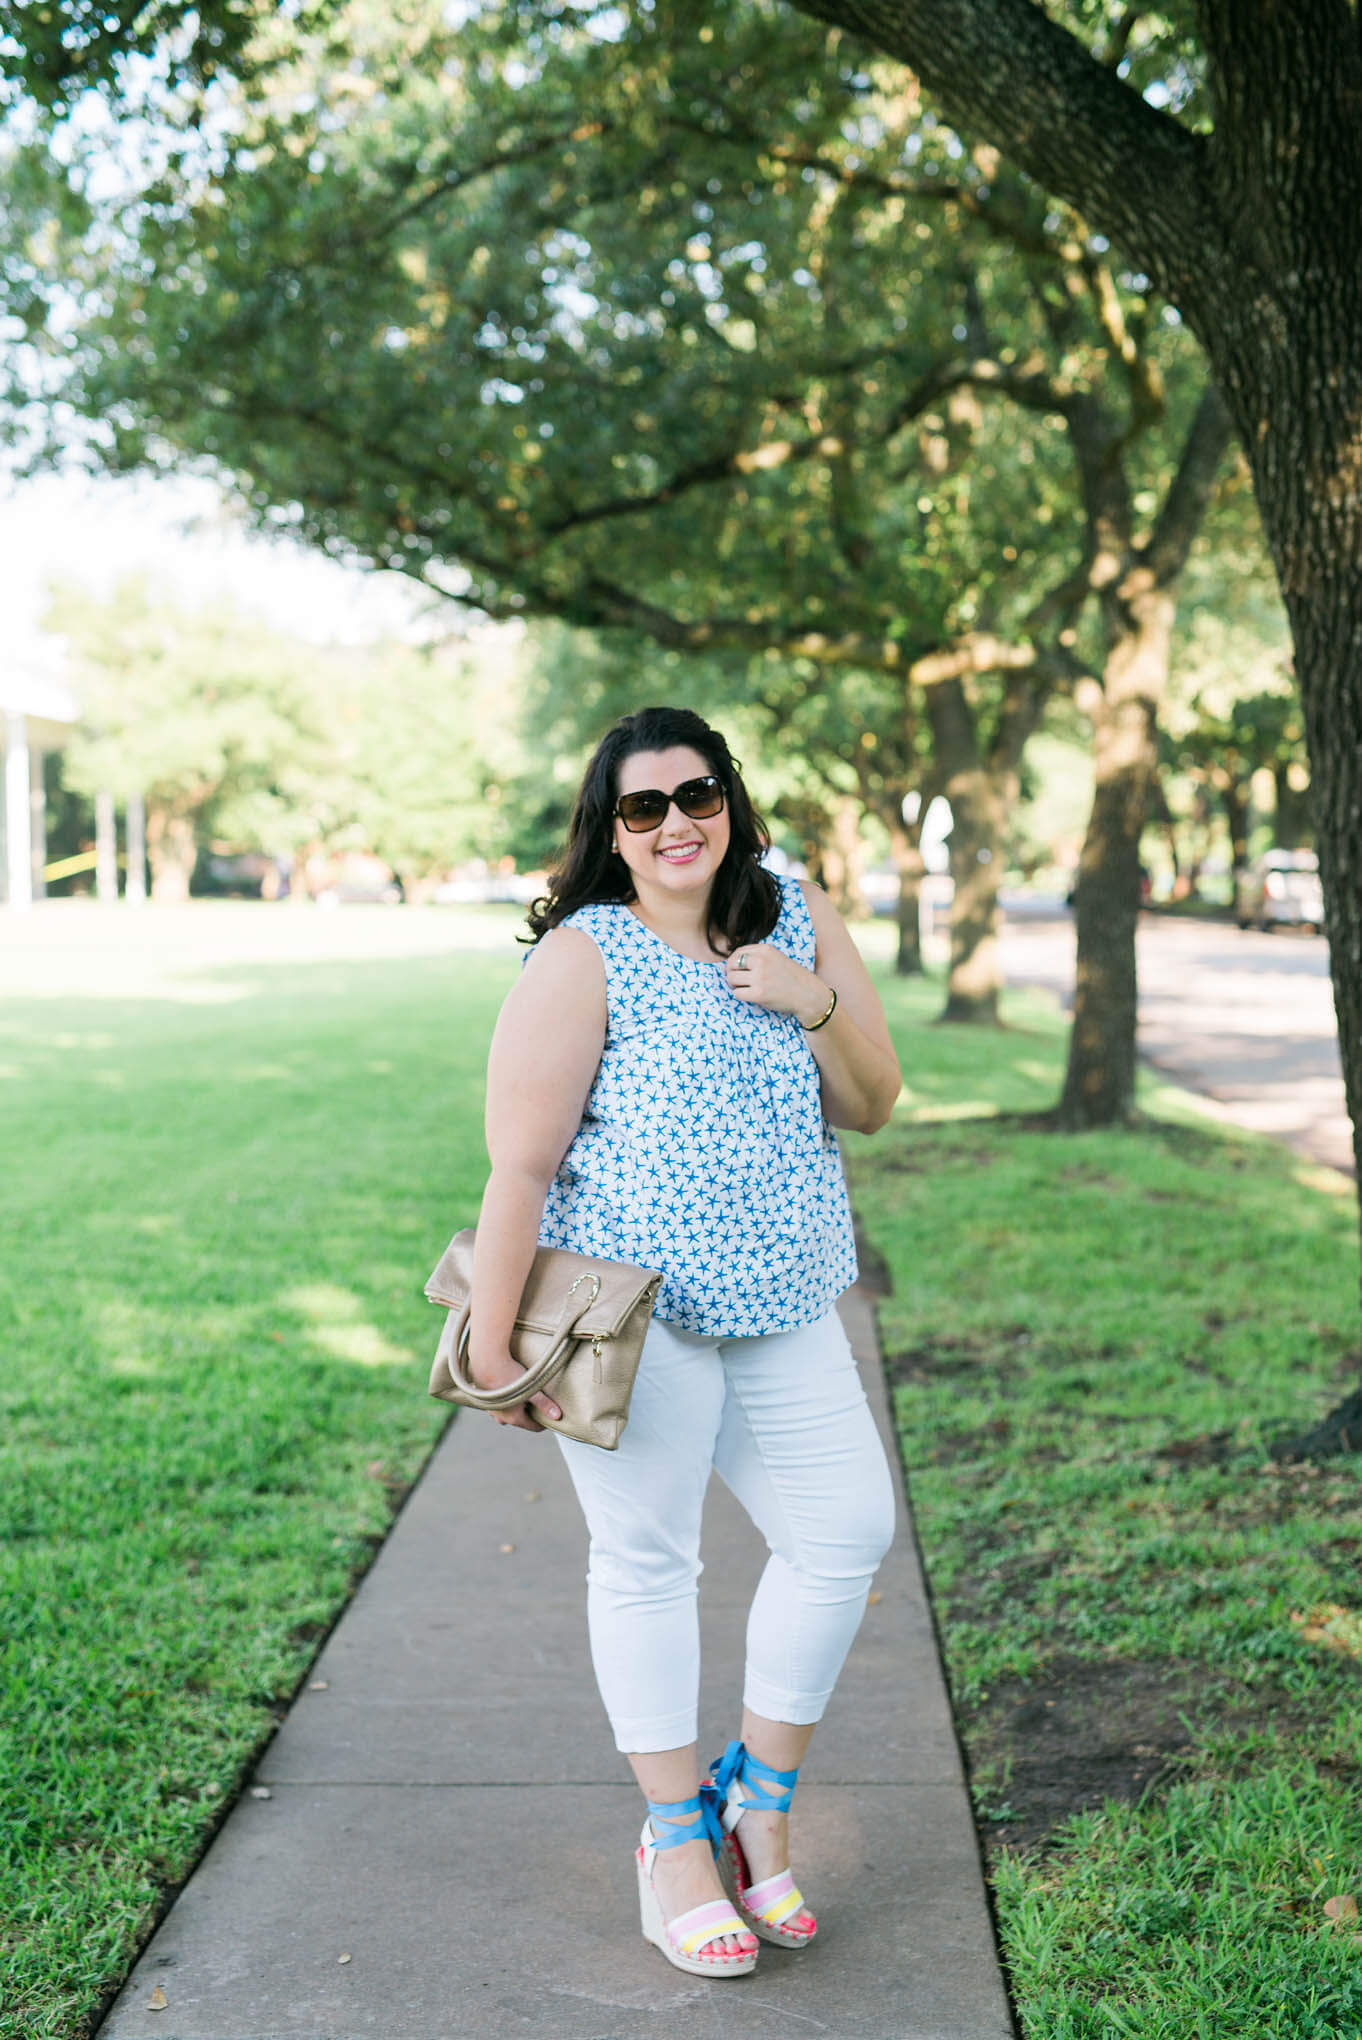 Kate Spade Summer Fun | Something Gold, Something Blue curvy style blog by Emily Bastedo | Plus Size Fashion, Summer fashion, What to wear in the summer, Kate Spade wedges, Melissa McCarthy Seven white capris, Elaine Turner purse, Chanel sunglasses 